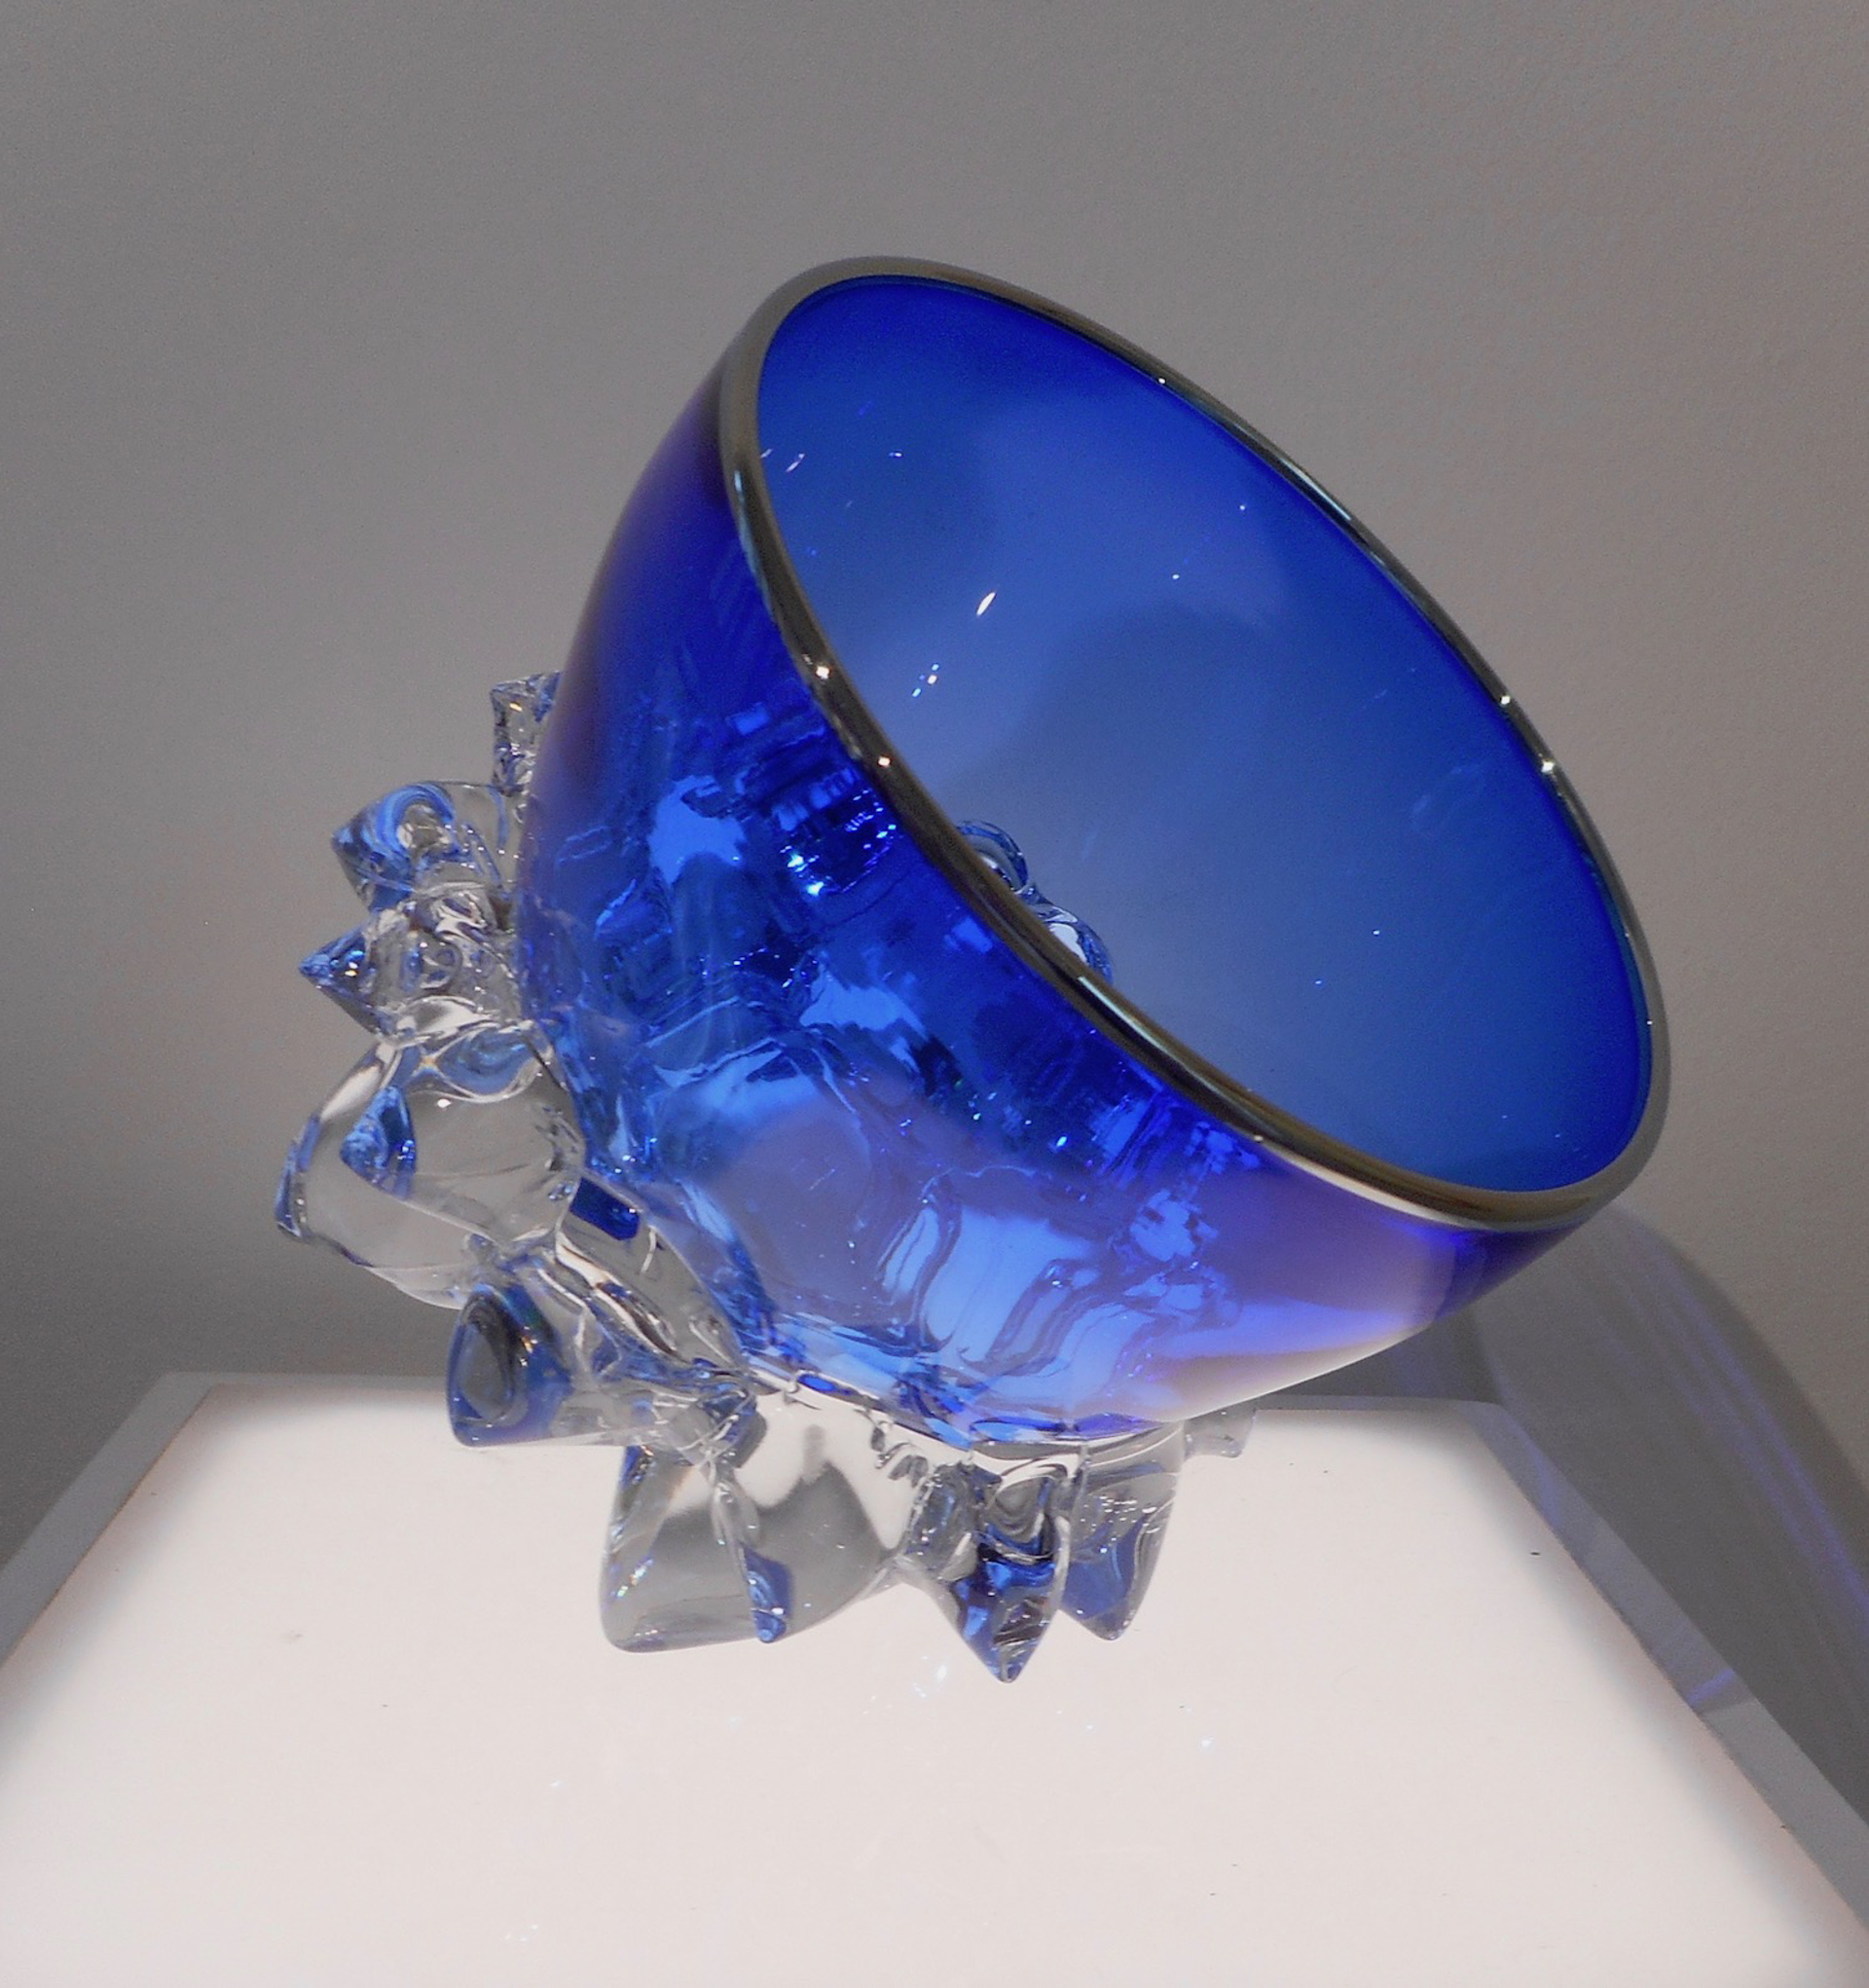 Small Thorn Vessel XV (Cobalt/Silver) by Andrew Madvin